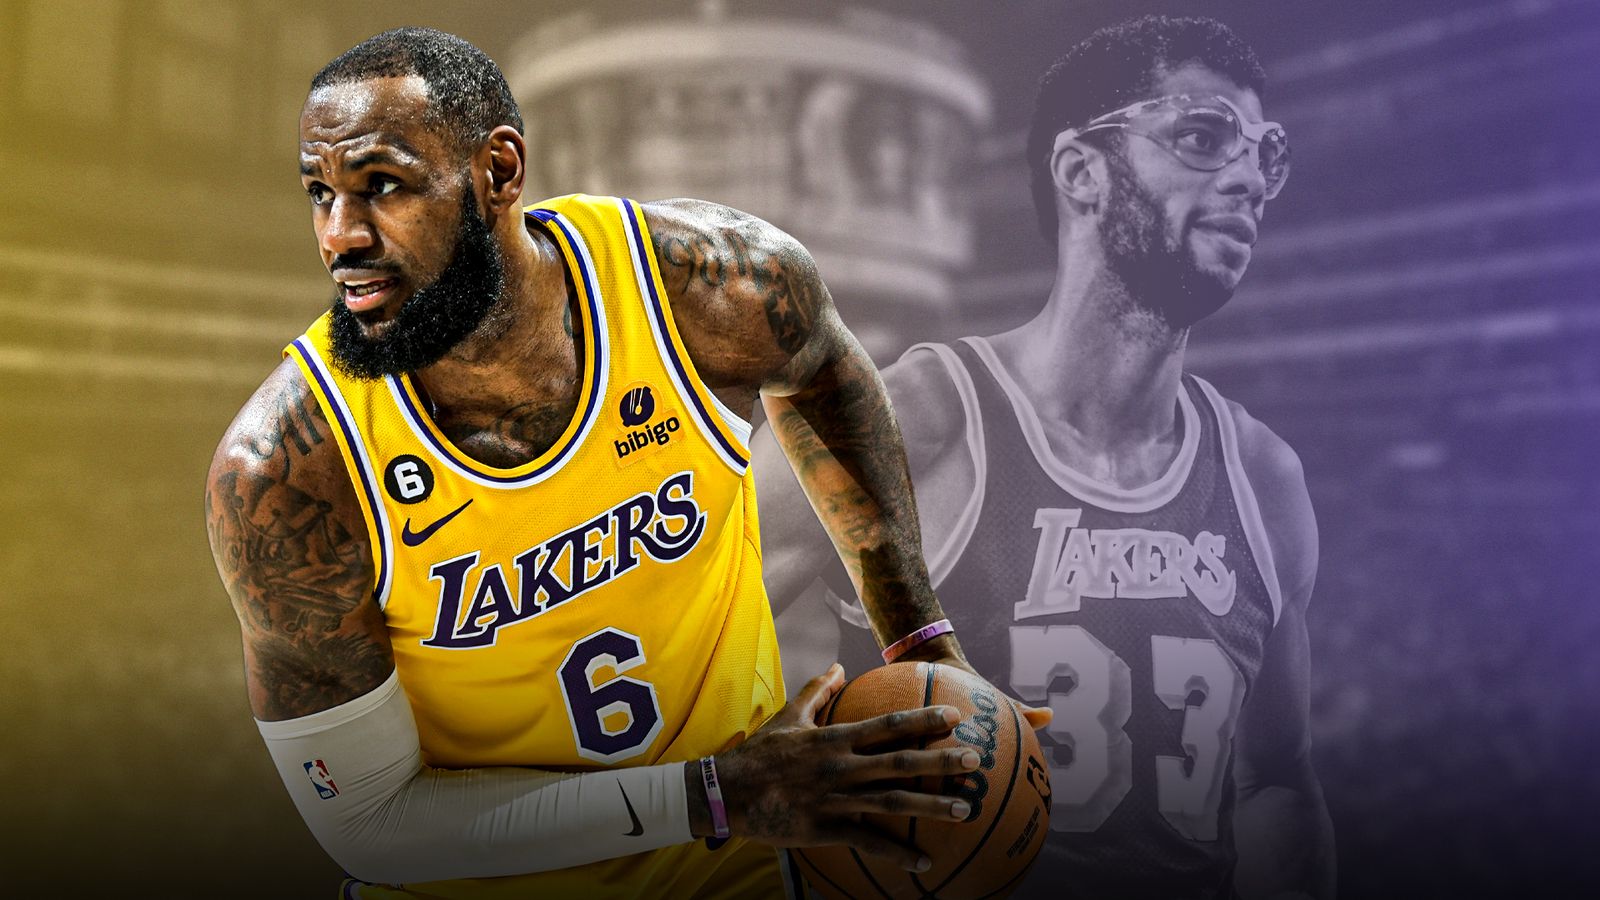 Top 10 Most Popular Players In The NBA Right Now: LeBron James Is